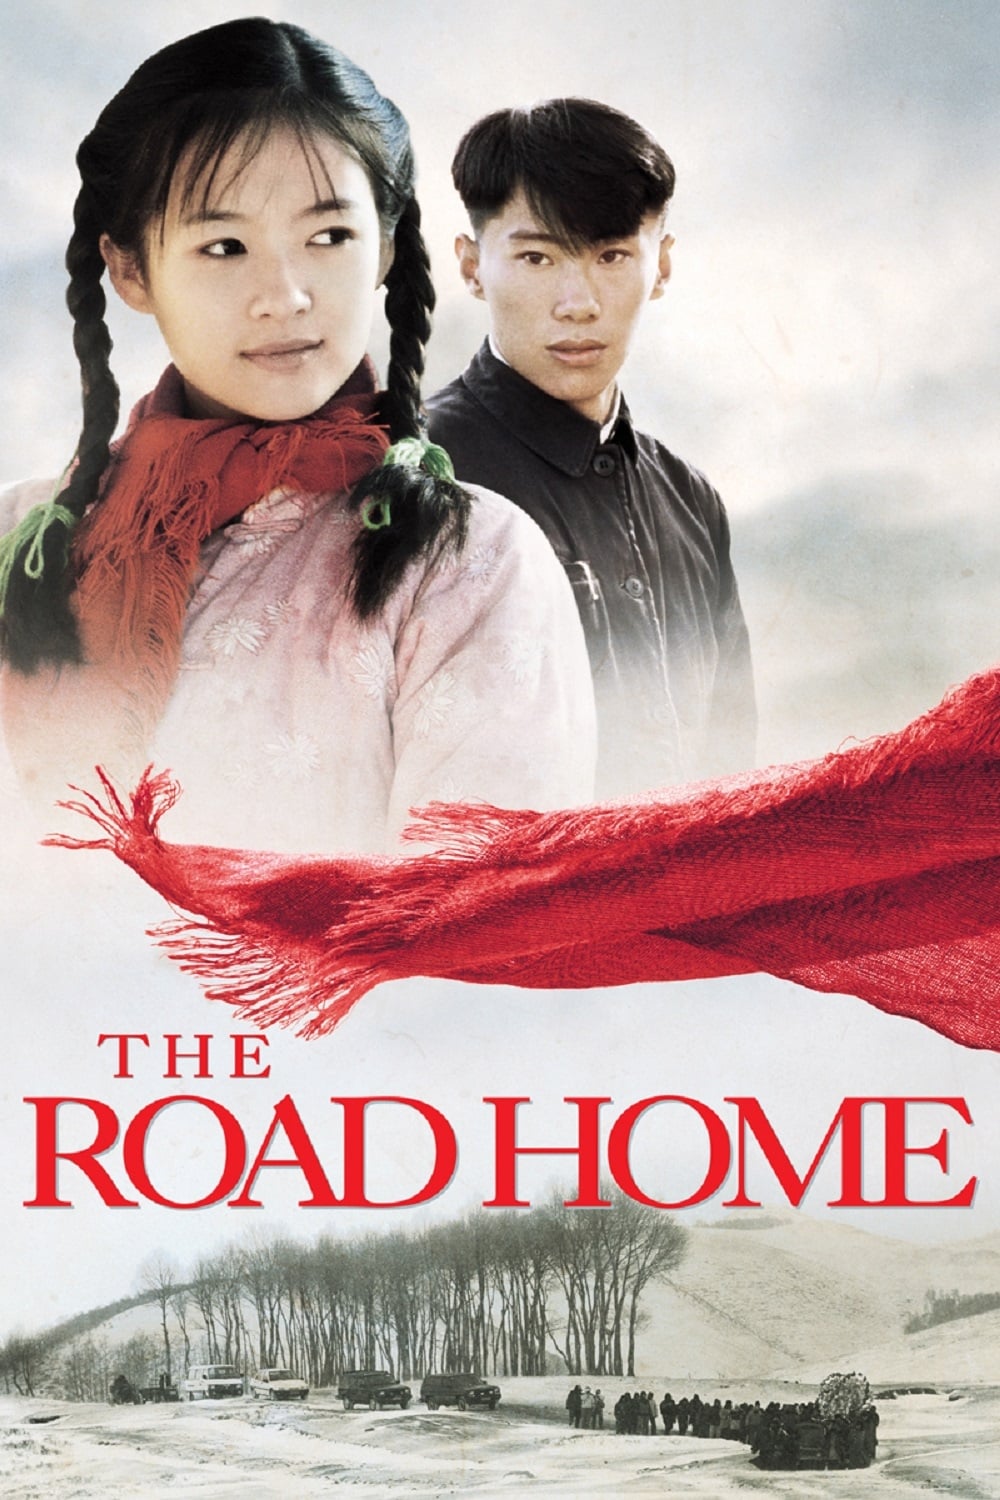 The Road Home streaming